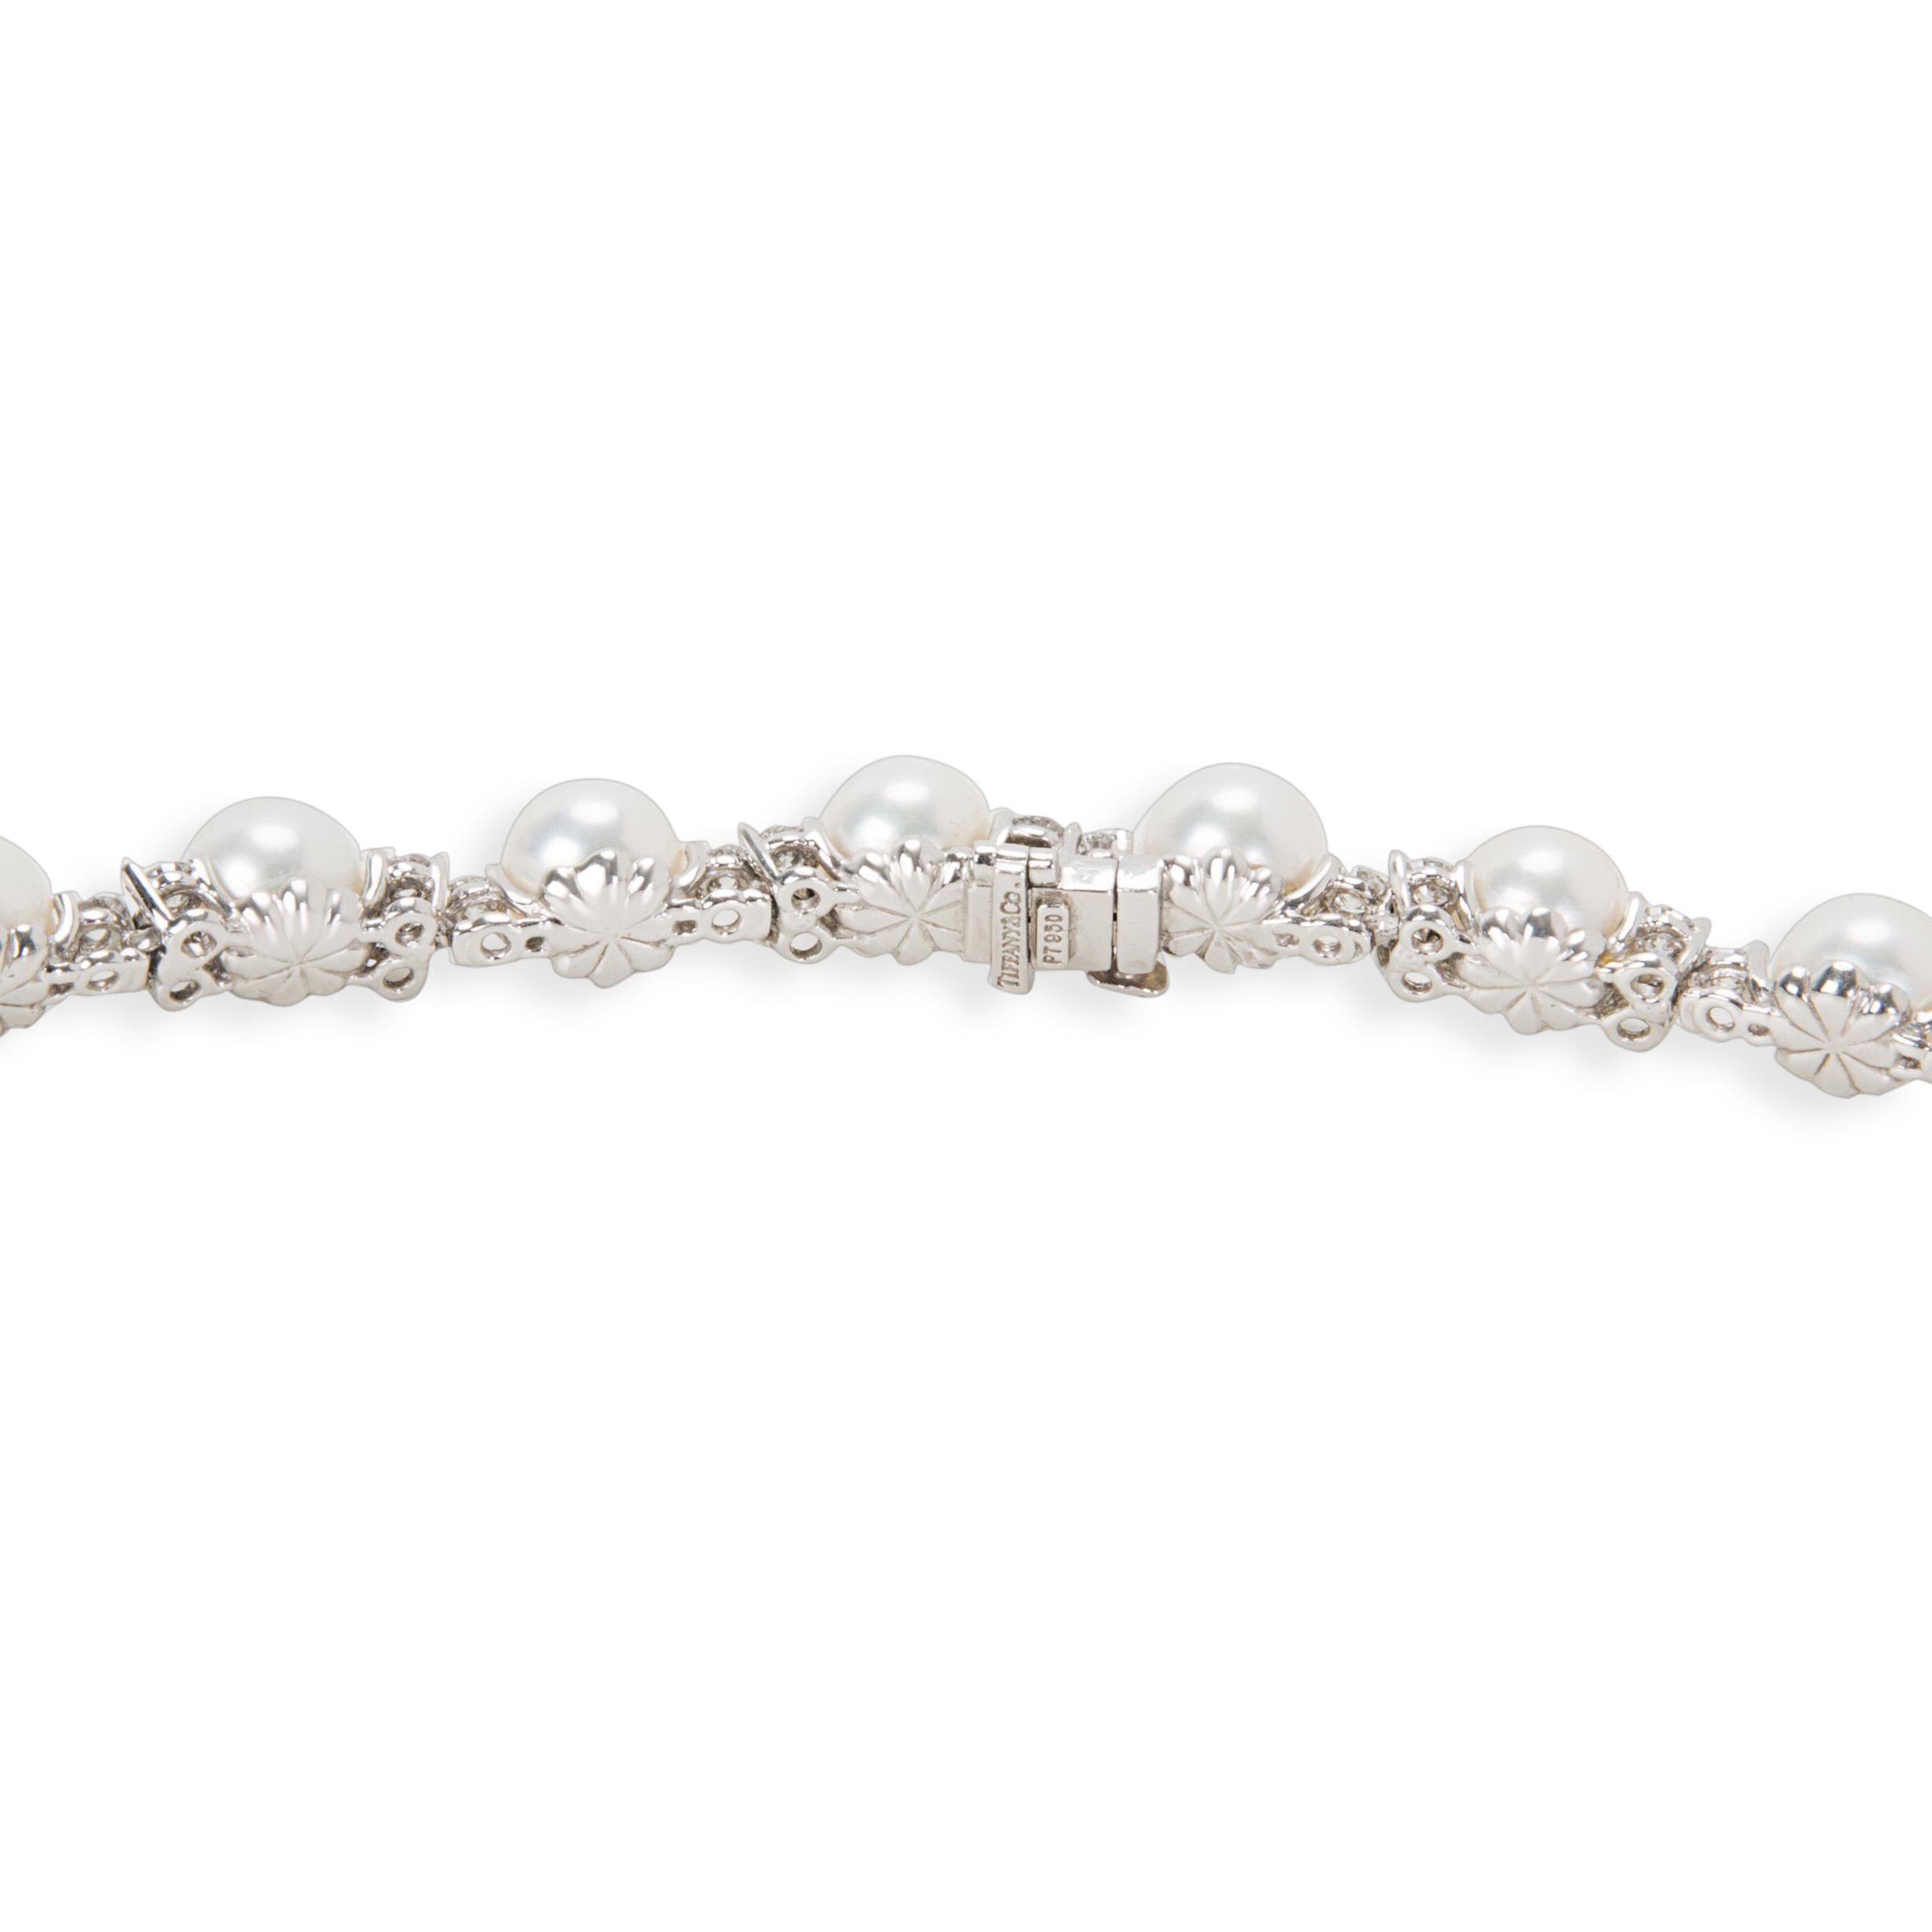 Tiffany & Co. Aria Diamond and Akoya Pearl Necklace in Platinum 5.40 Carats (Rundschliff)